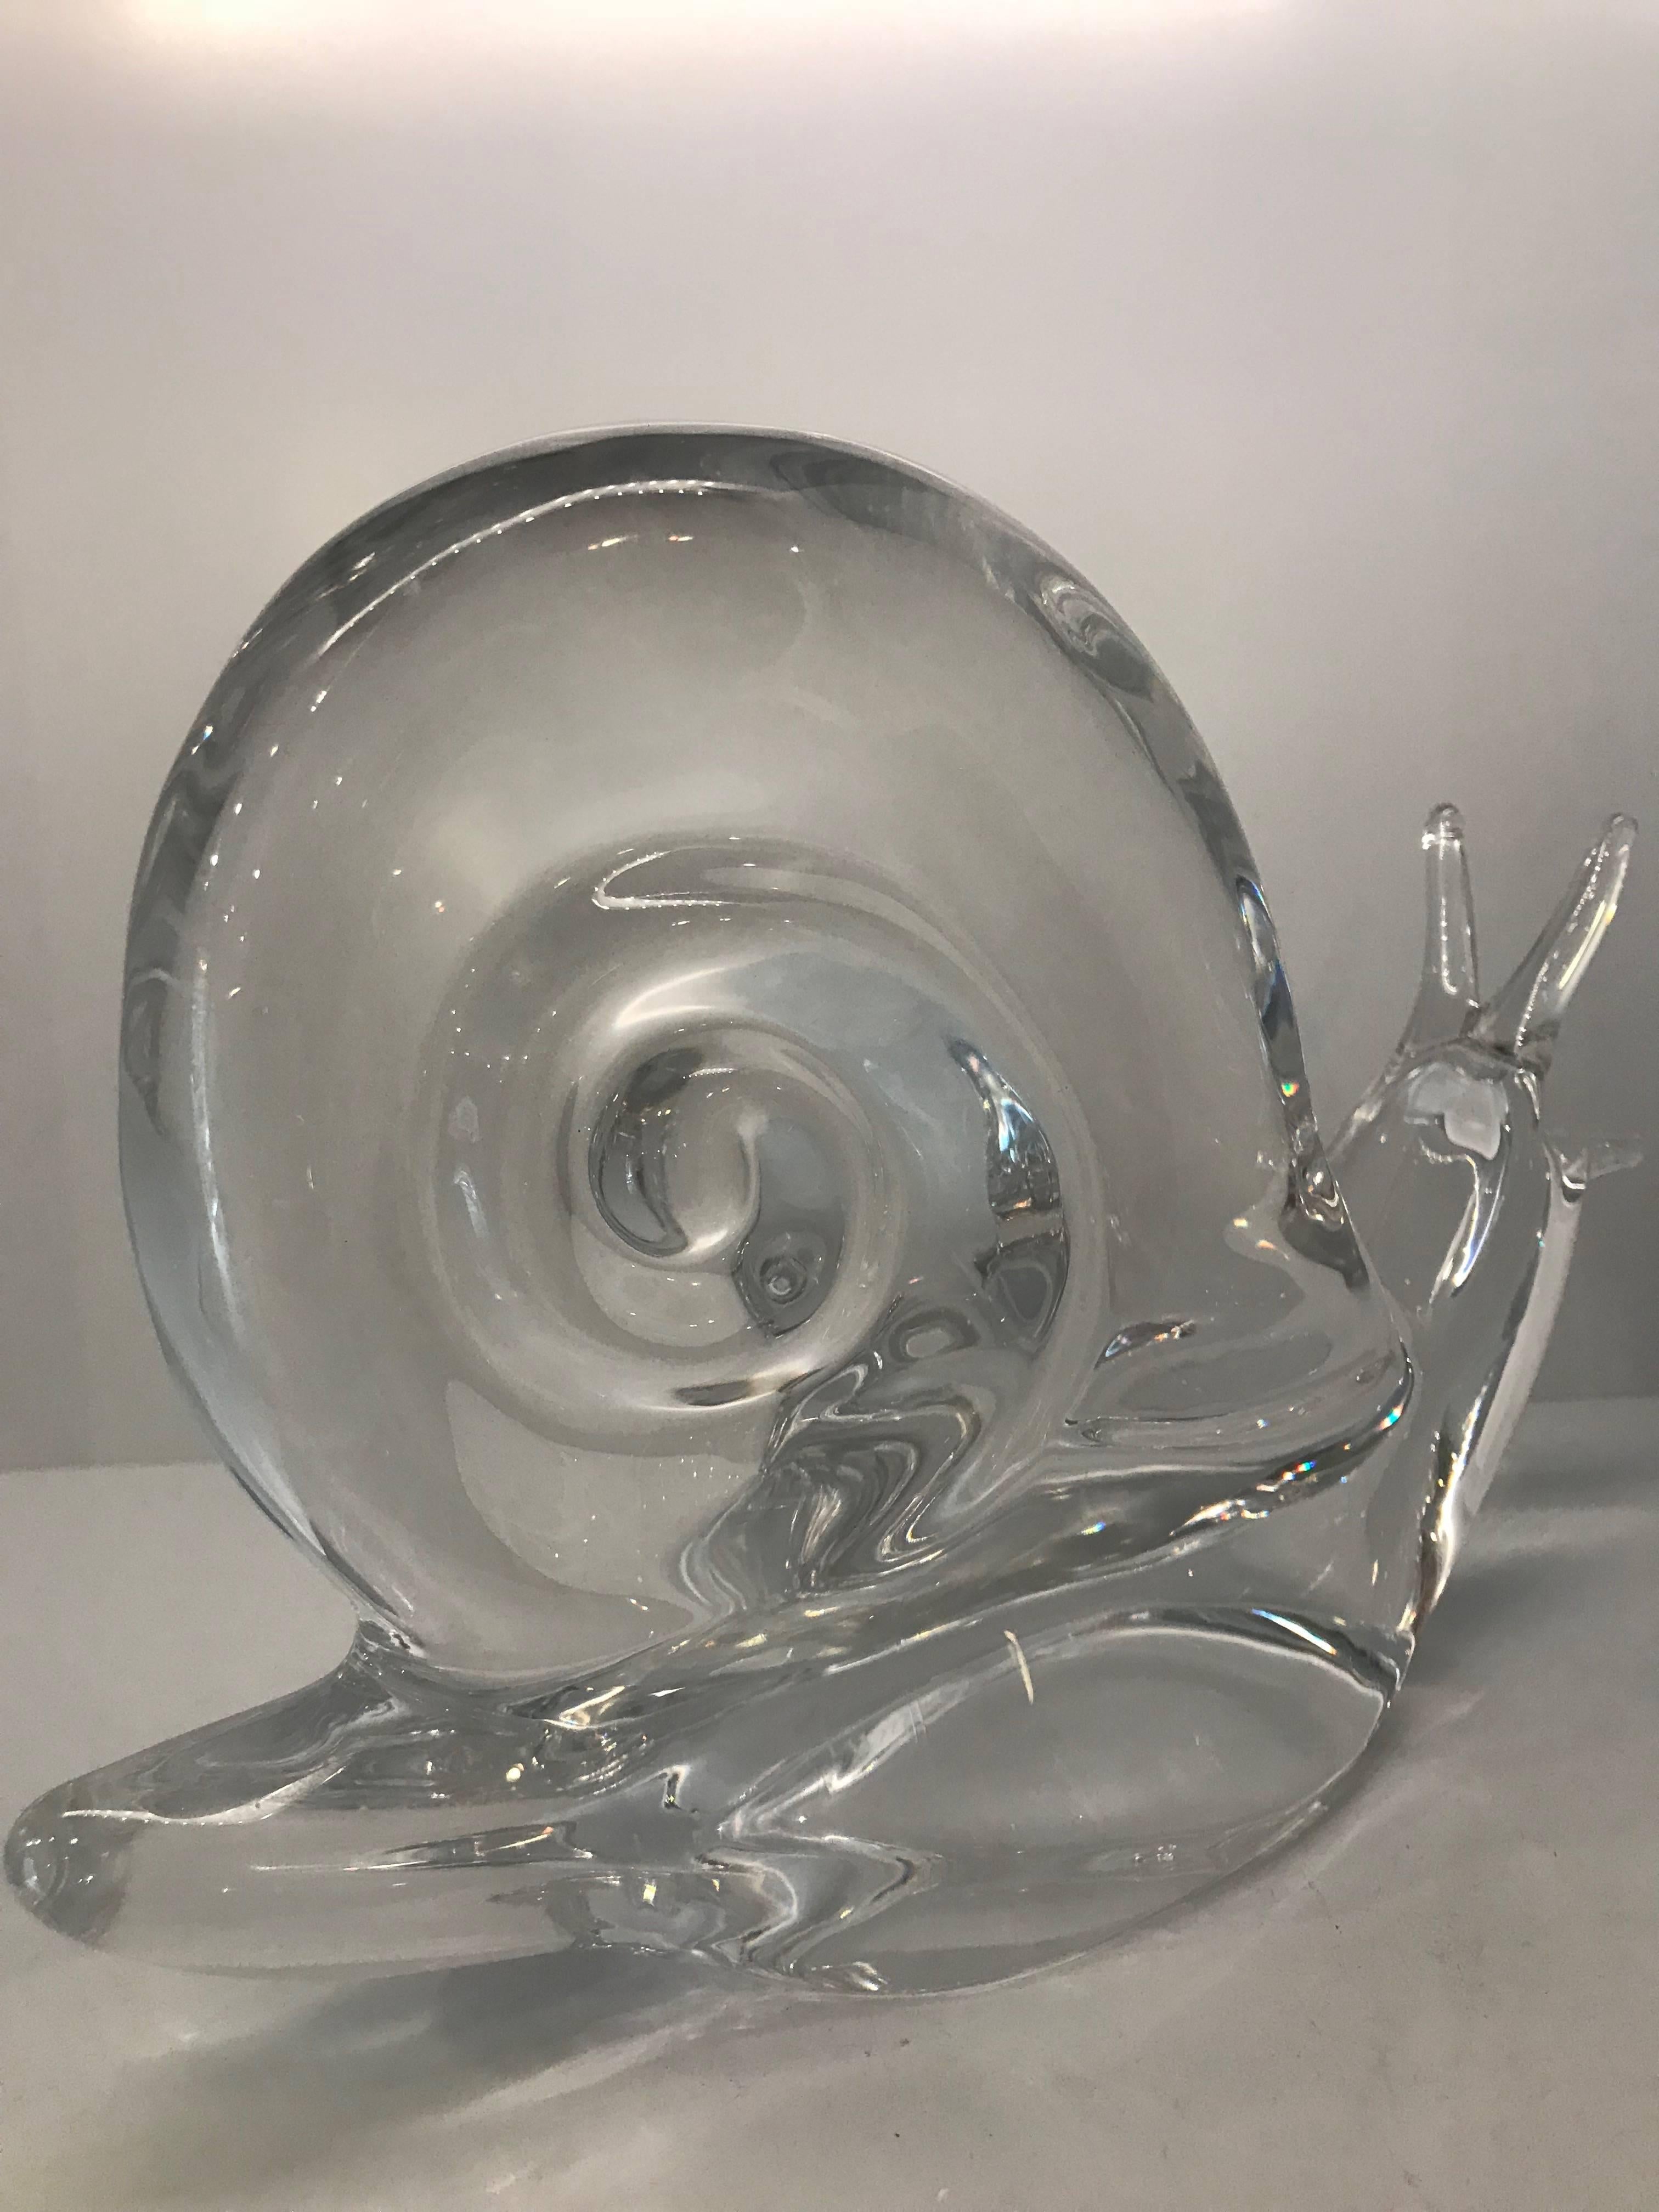 Beautiful crystal snail or escargot from Daum. Daum is a crystal studio based in Nancy, France, founded in 1878 by Jean Daum.